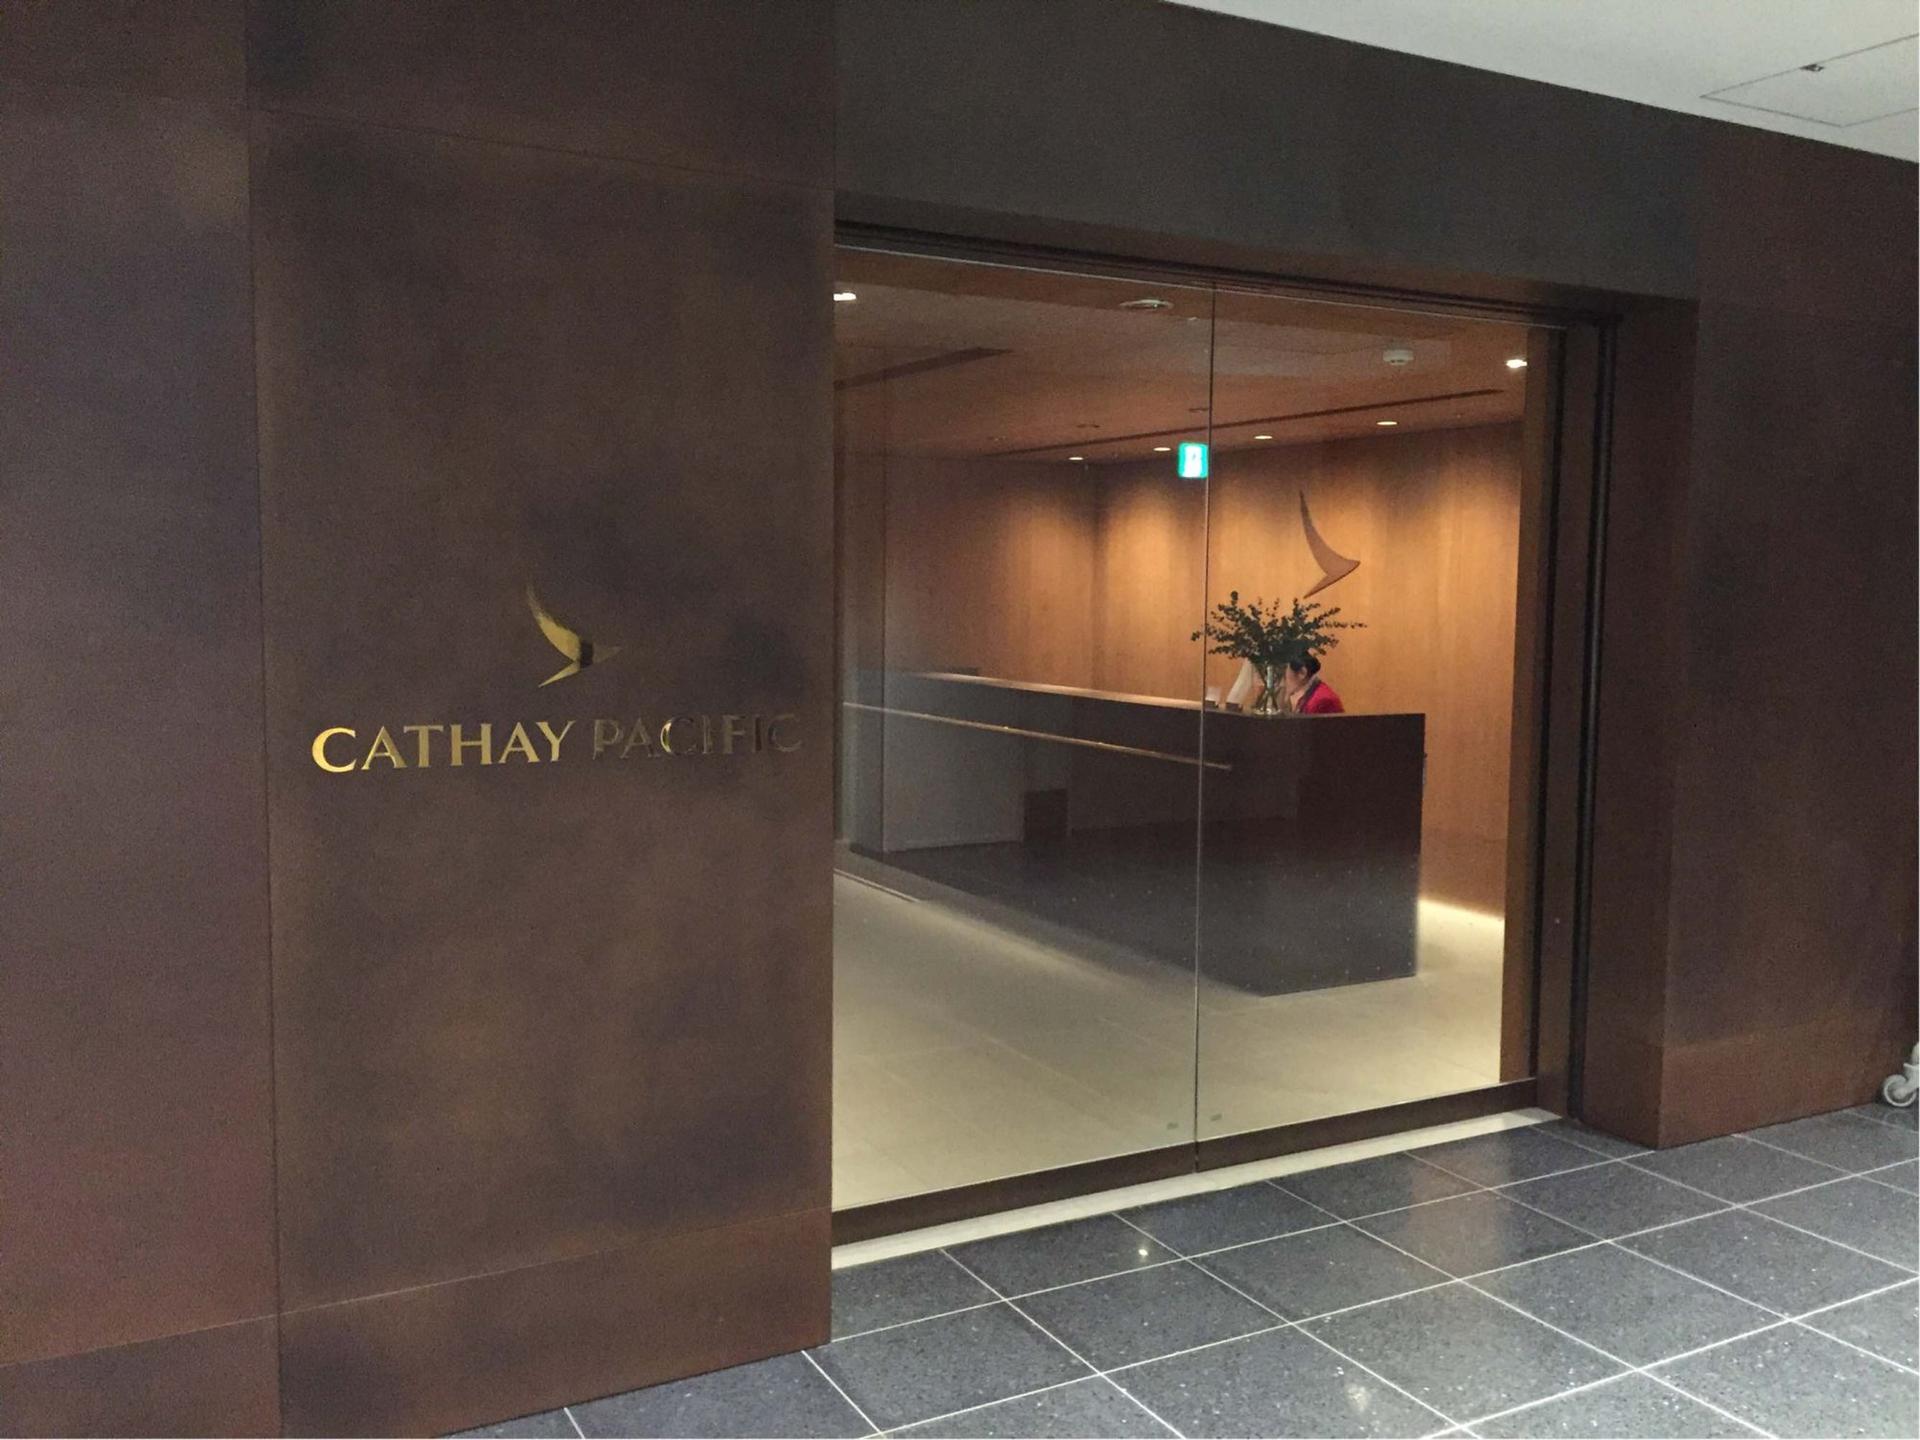 Cathay Pacific Lounge image 6 of 49